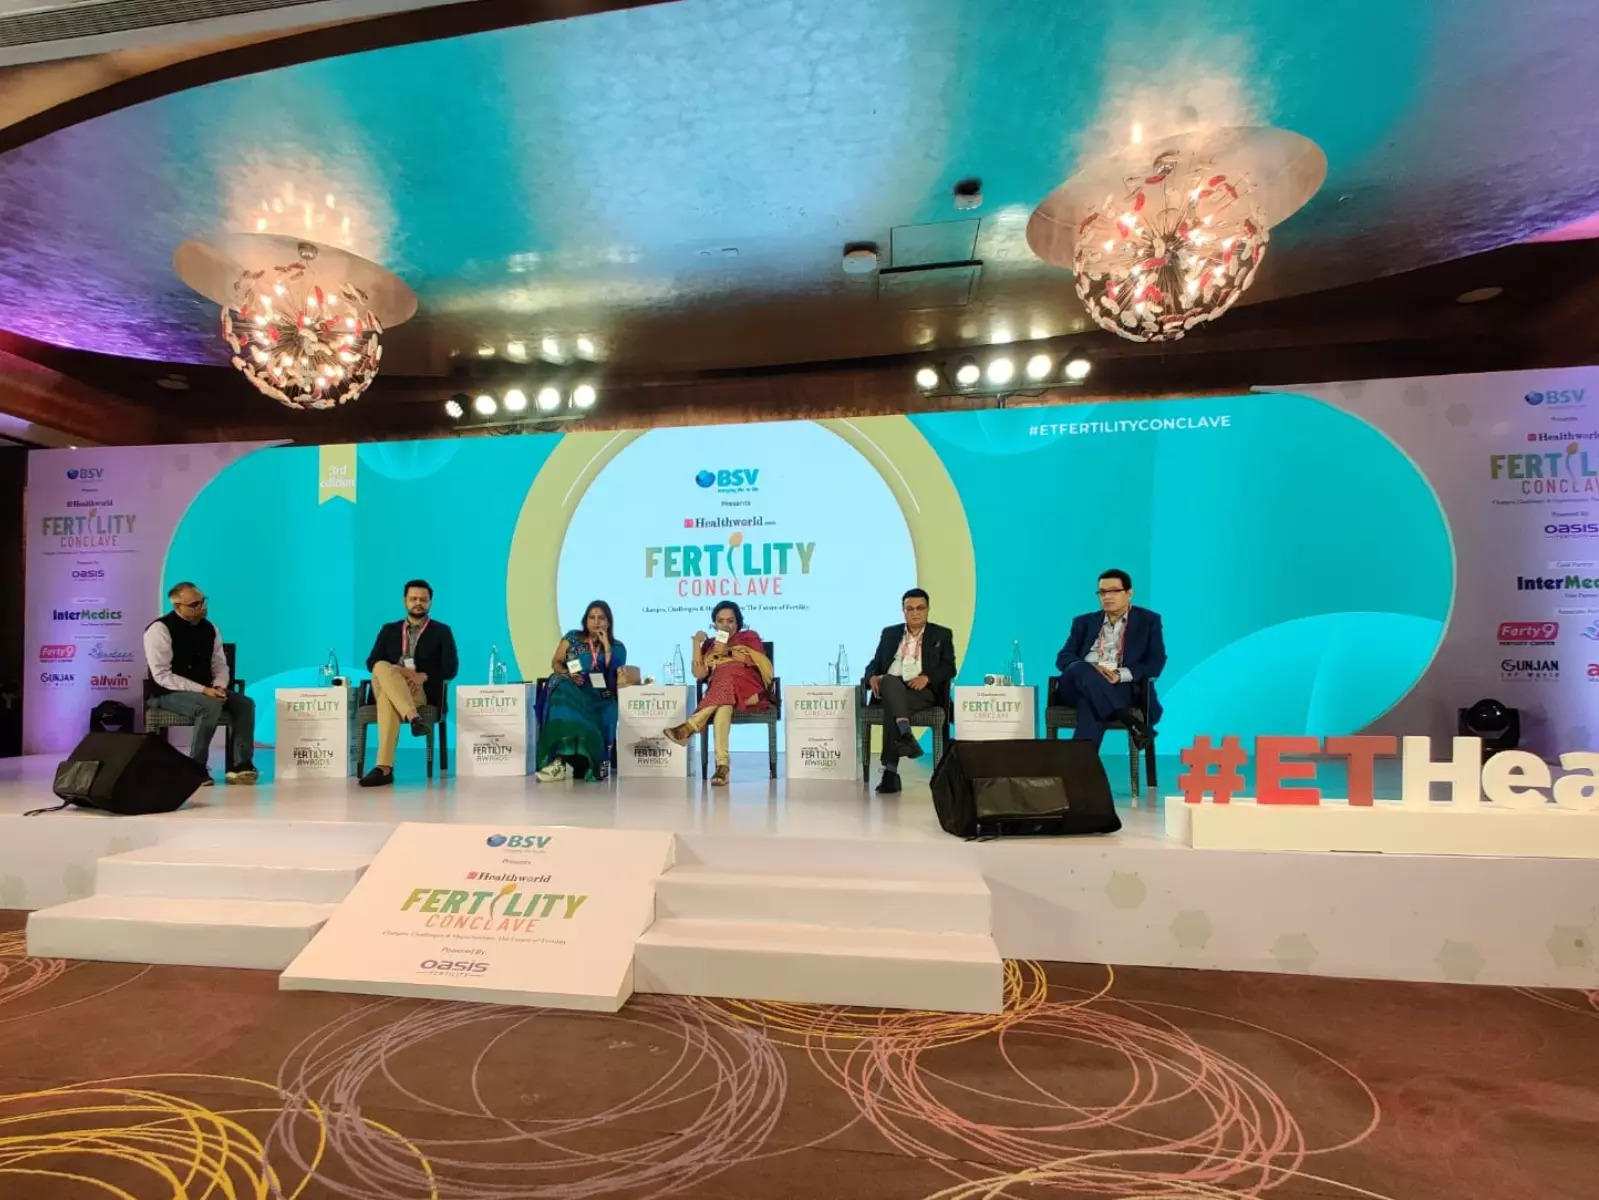 ETHealthworld Fertility Conclave 2023: Understanding persisting fertility issues in India